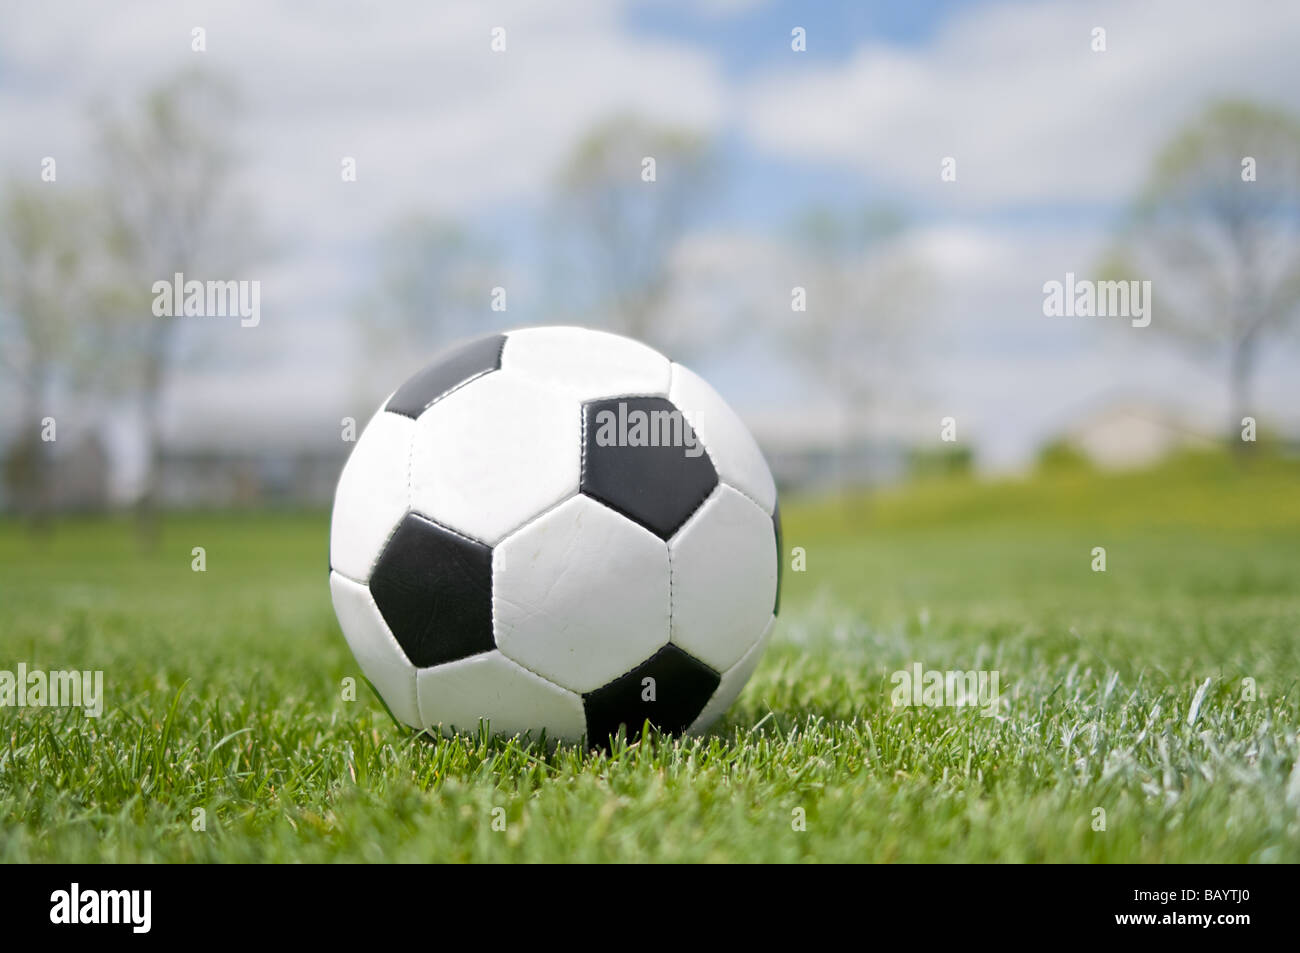 Soccer ball in the grass field Stock Photo